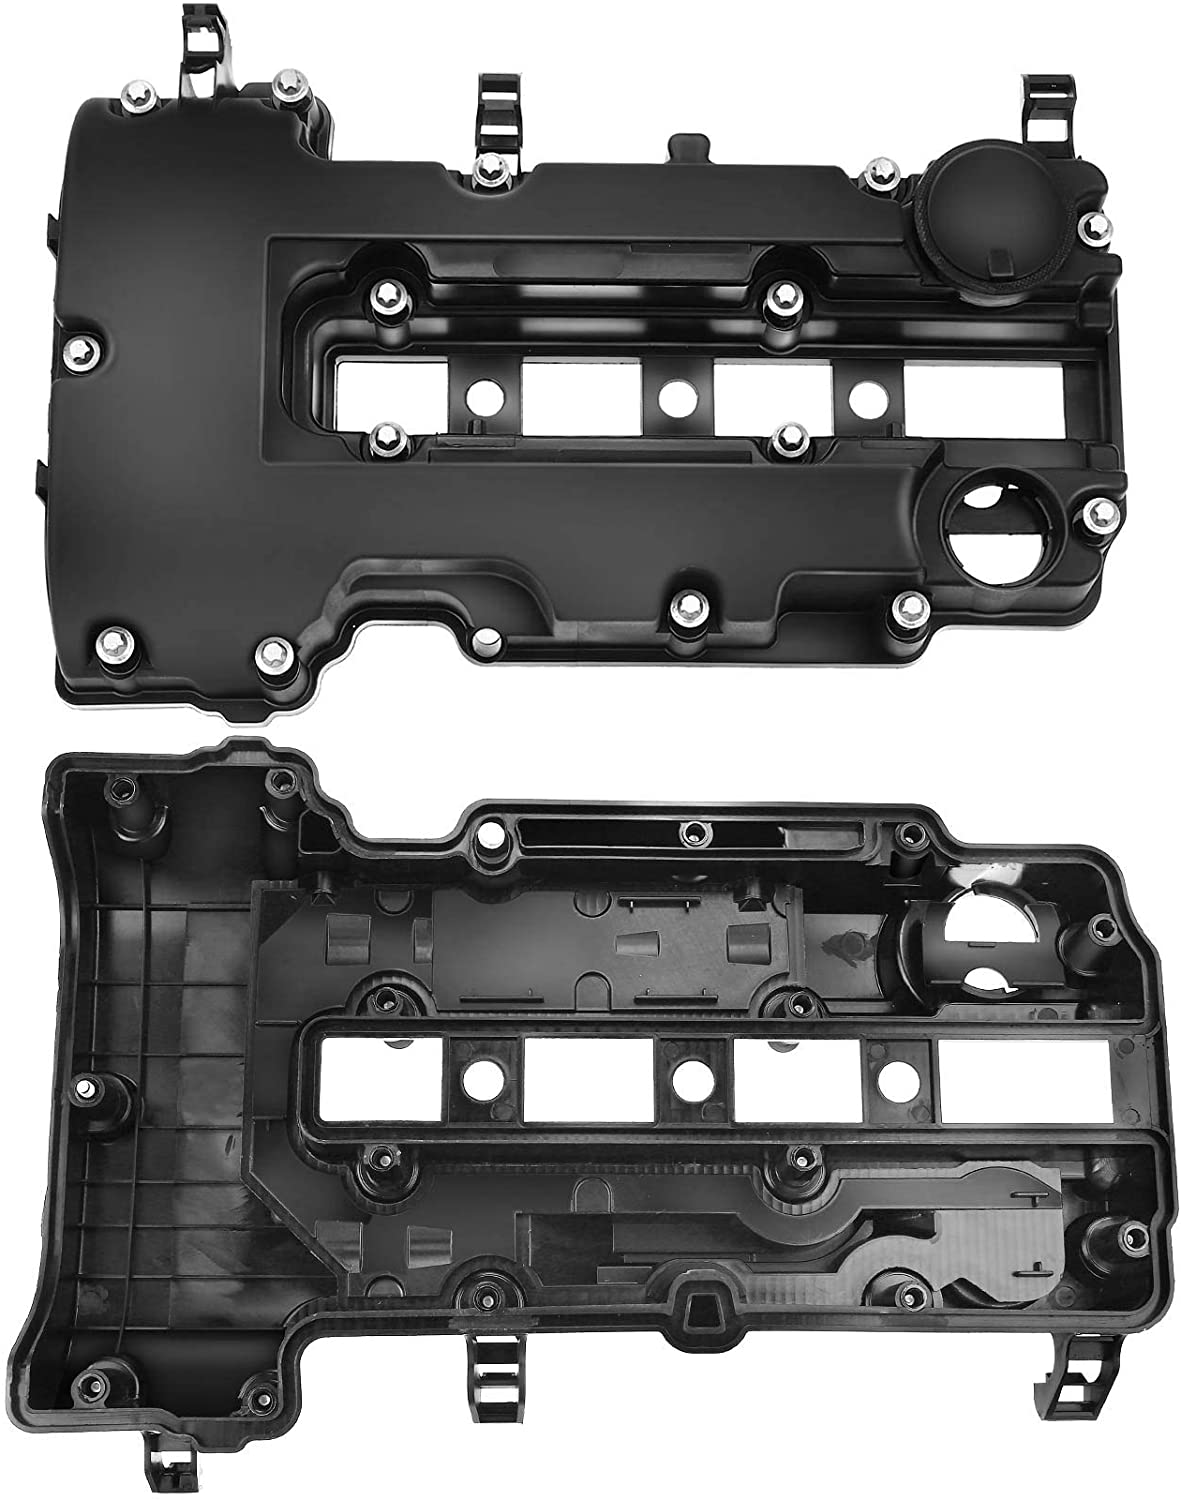 A-Premium Engine Valve Cover with Gasket  PCV Cover Compatible with  Chevrolet Cruze 2011-2019 Sonic 2012-2019 Volt 2011-2015 Trax Buick Encore  2013-2019 Cadillac ELR 2014-2016 1.4L Gas